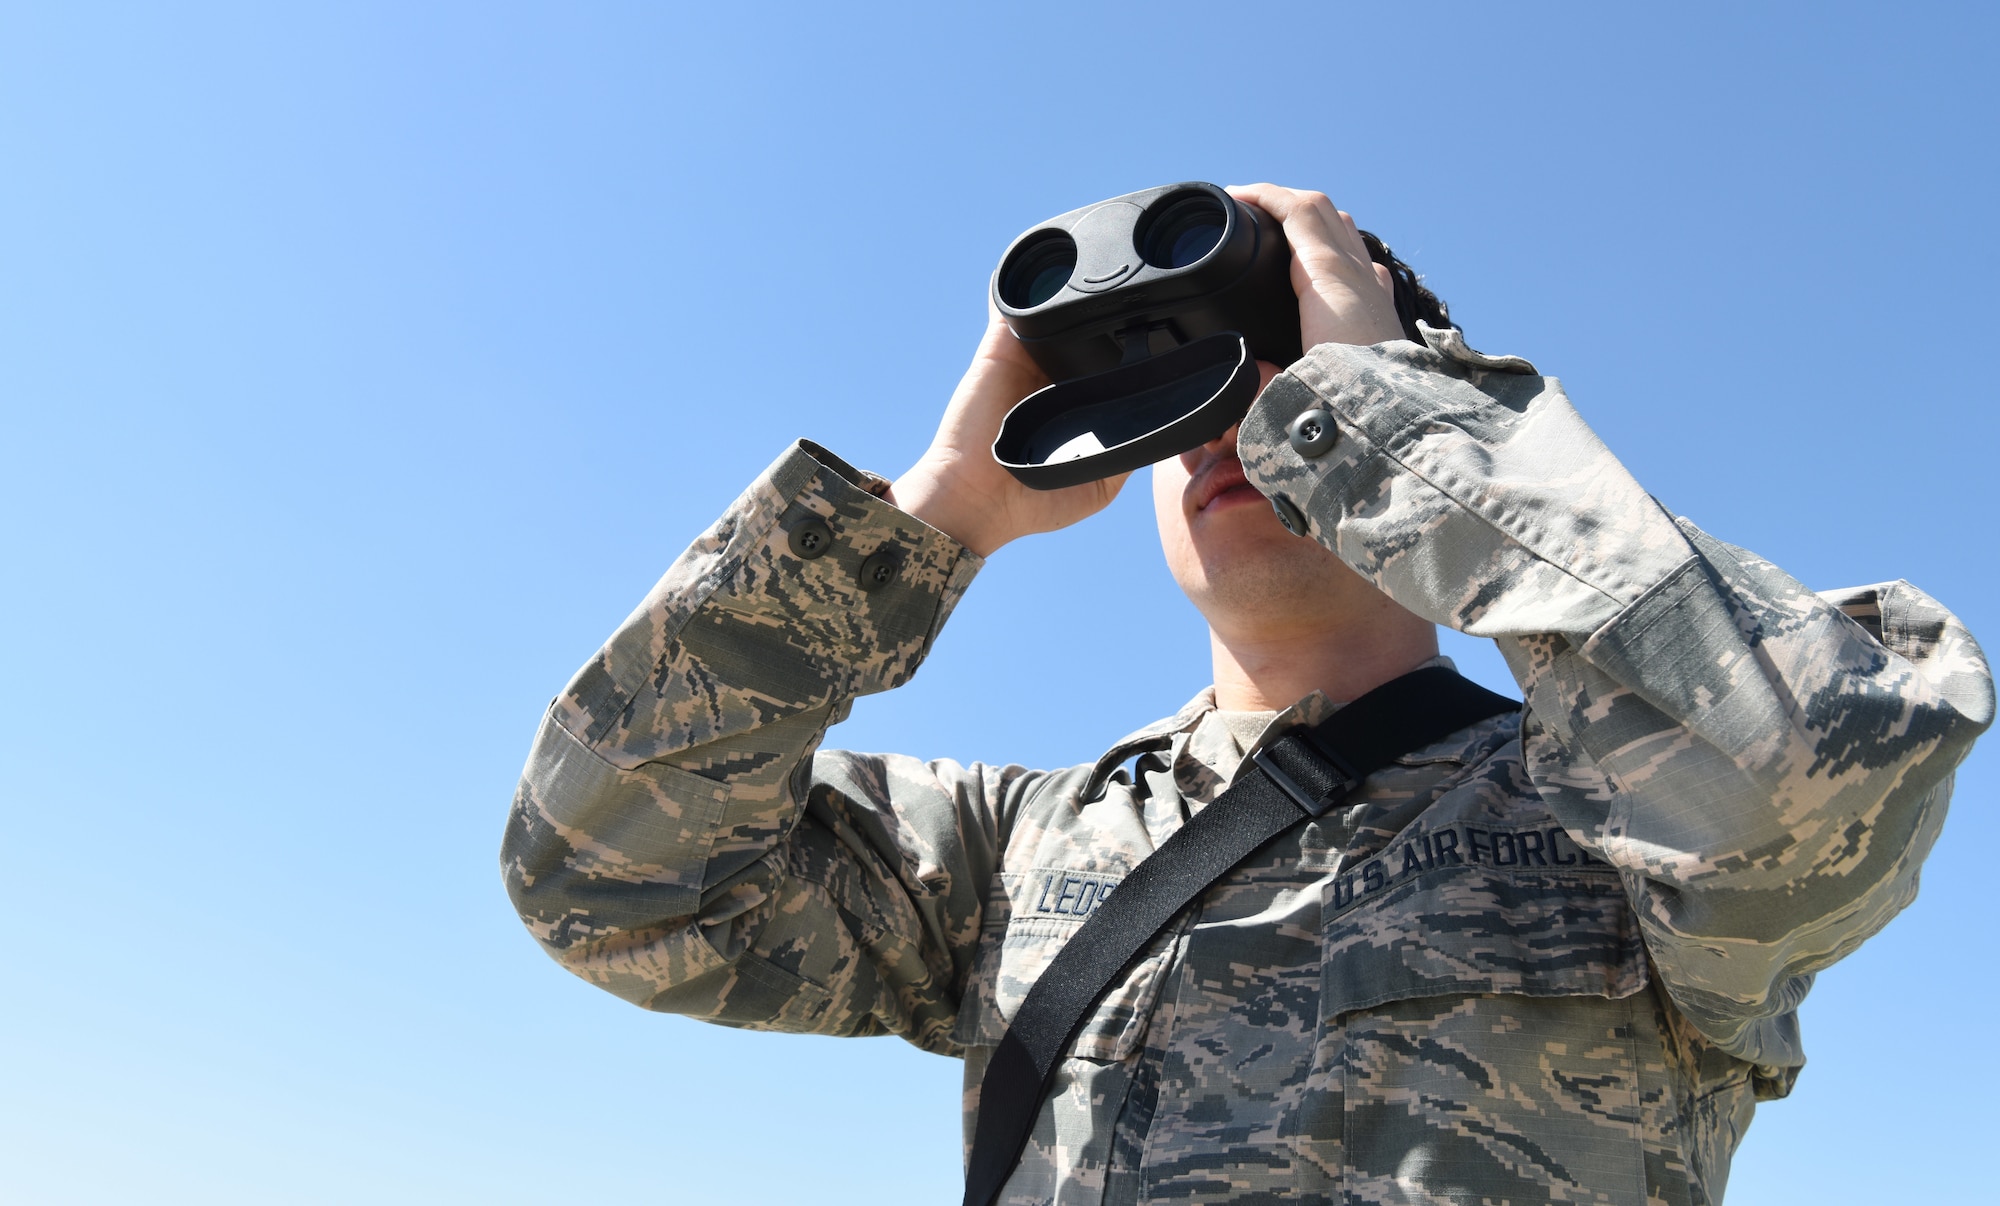 Airman James Leos, 28th Operations Support Squadron weather apprentice, uses a pair of binoculars with a laser range finder to help forecast weather conditions at Ellsworth Air Force Base, S.D, May 30, 2018. The weather flight has to stay on the lookout for changing weather conditions so the flying mission is not affected by any surprise changes in the weather. (U.S. Air Force photo by Airman 1st Class Thomas Karol)